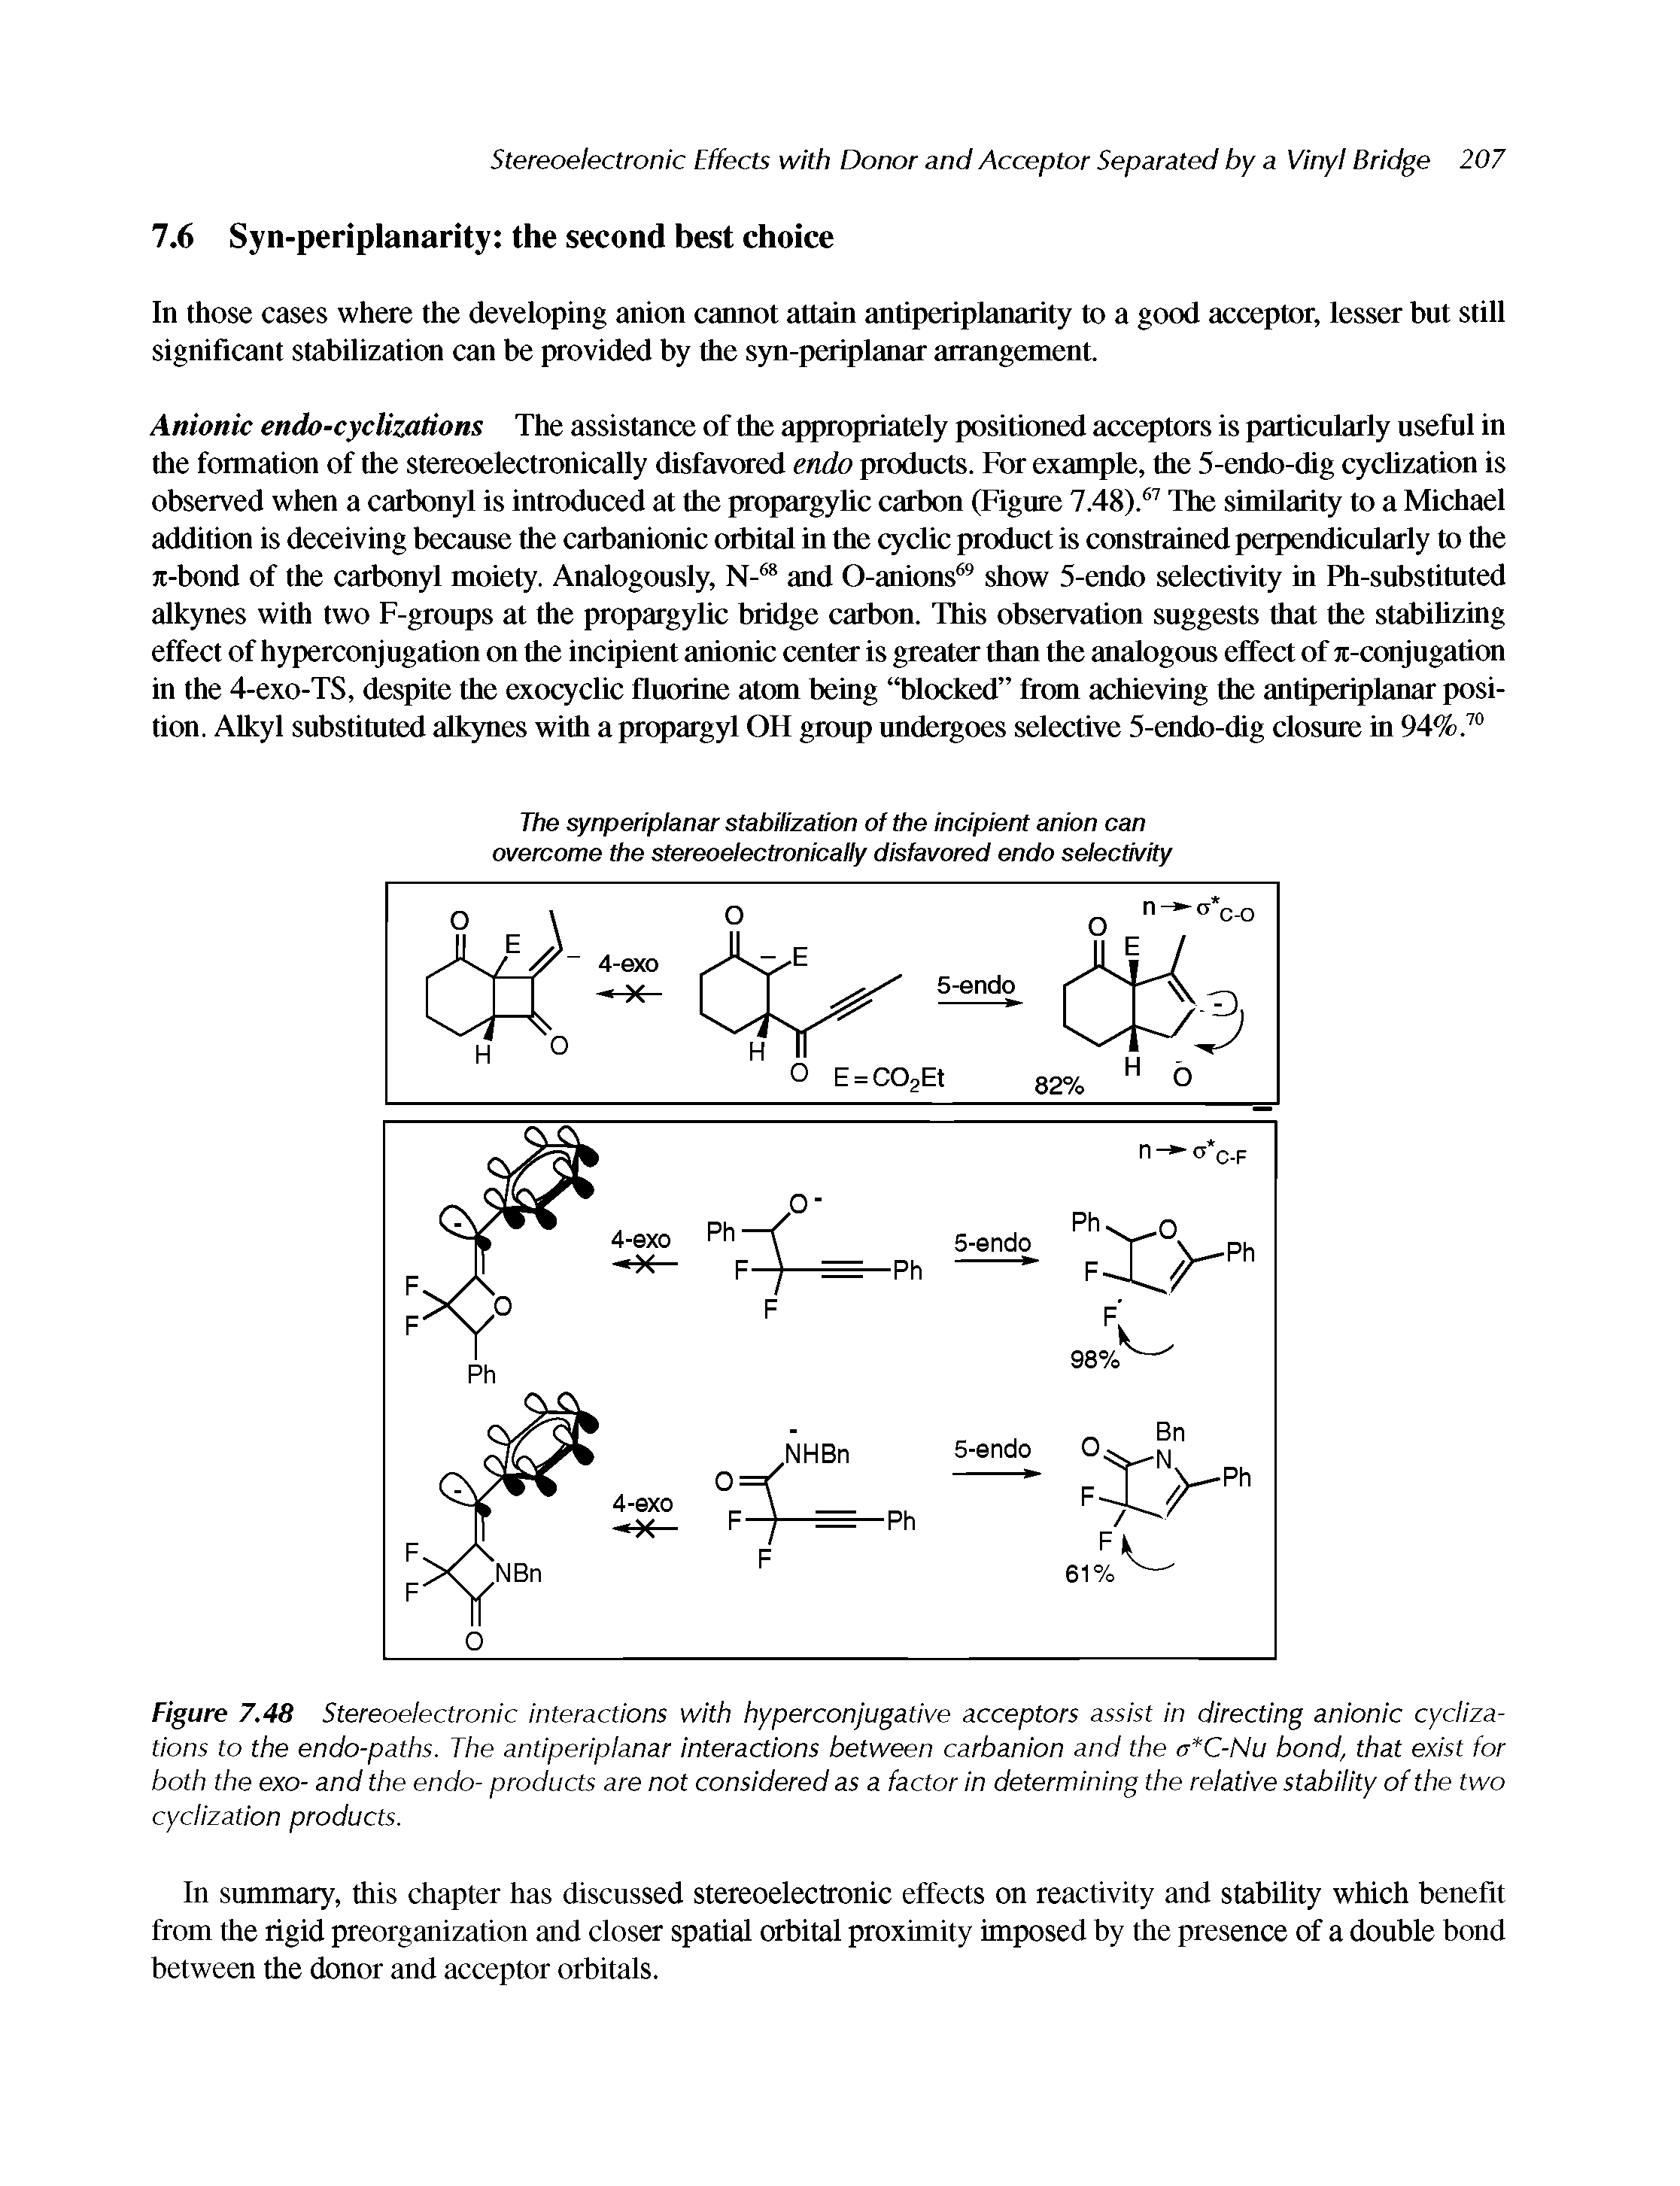 Figure 7.48 Stereoelectronic interactions with hyperconjugative acceptors assist in directing anionic cycliza-tions to the endo-paths. The antiperiplanar interactions between carbanion and the a C-Nu bond, that exist for both the exo- and the endo- products are not considered as a factor in determining the relative stability of the two cycUzation products.